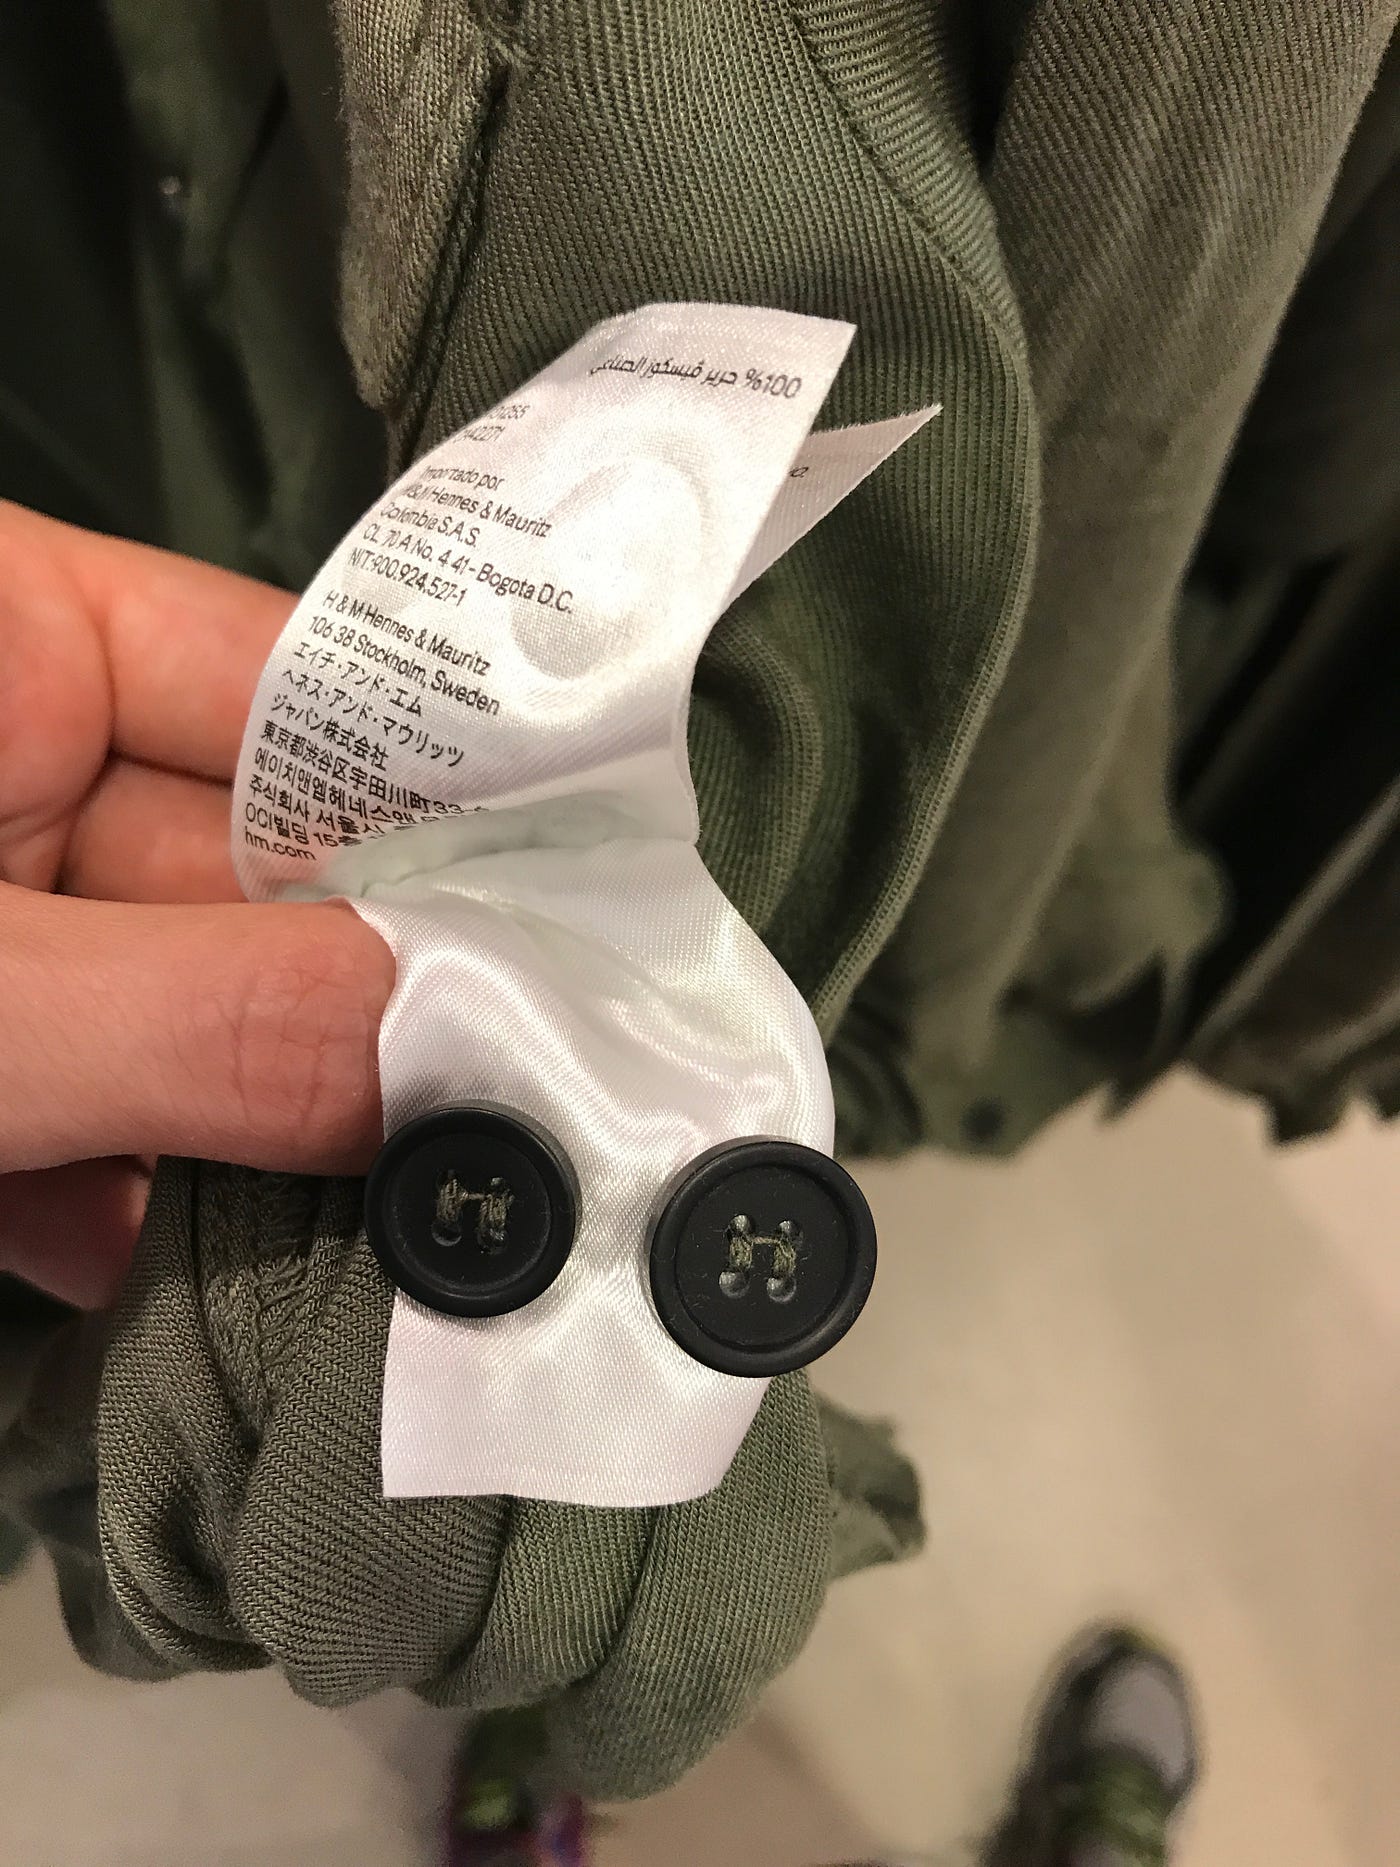 Why Are There So Many Tags In The Left Seam Of My Shirts? | by Silvia  Killingsworth | The Hairpin | Medium